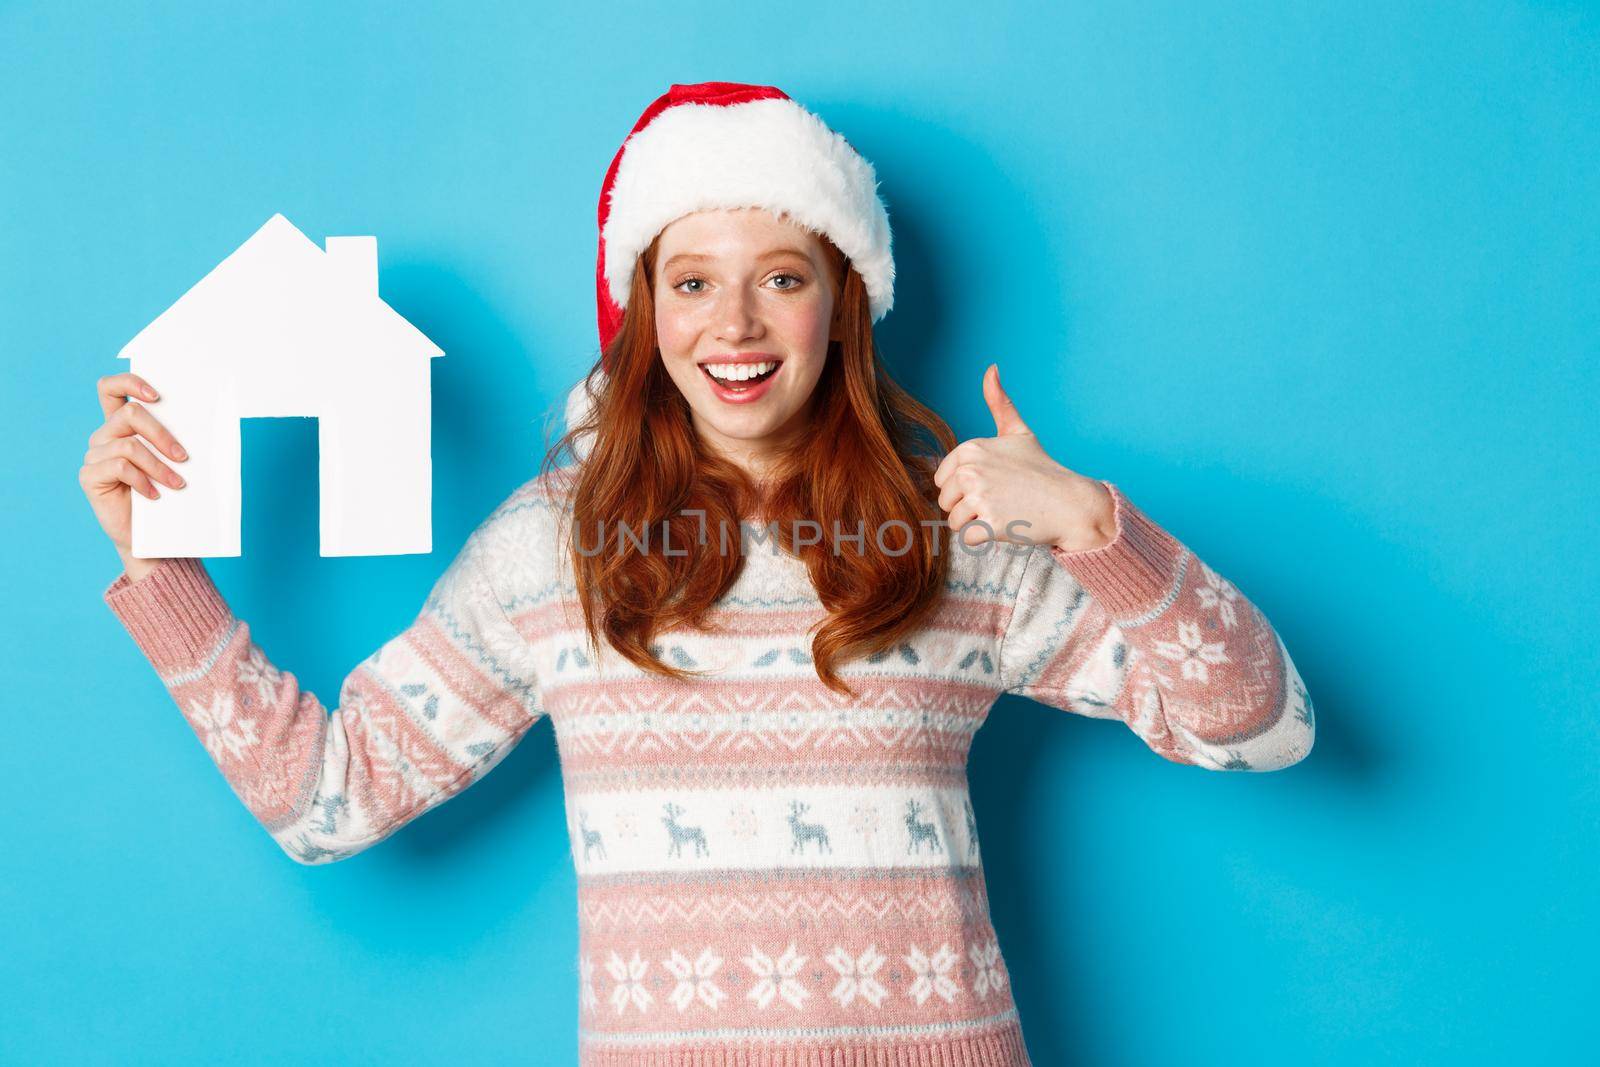 Holiday promos and real estate concept. Satisfied female model with red wavy hair, wearing santa hat and sweater, showing paper house model and thumbs-up, blue background.